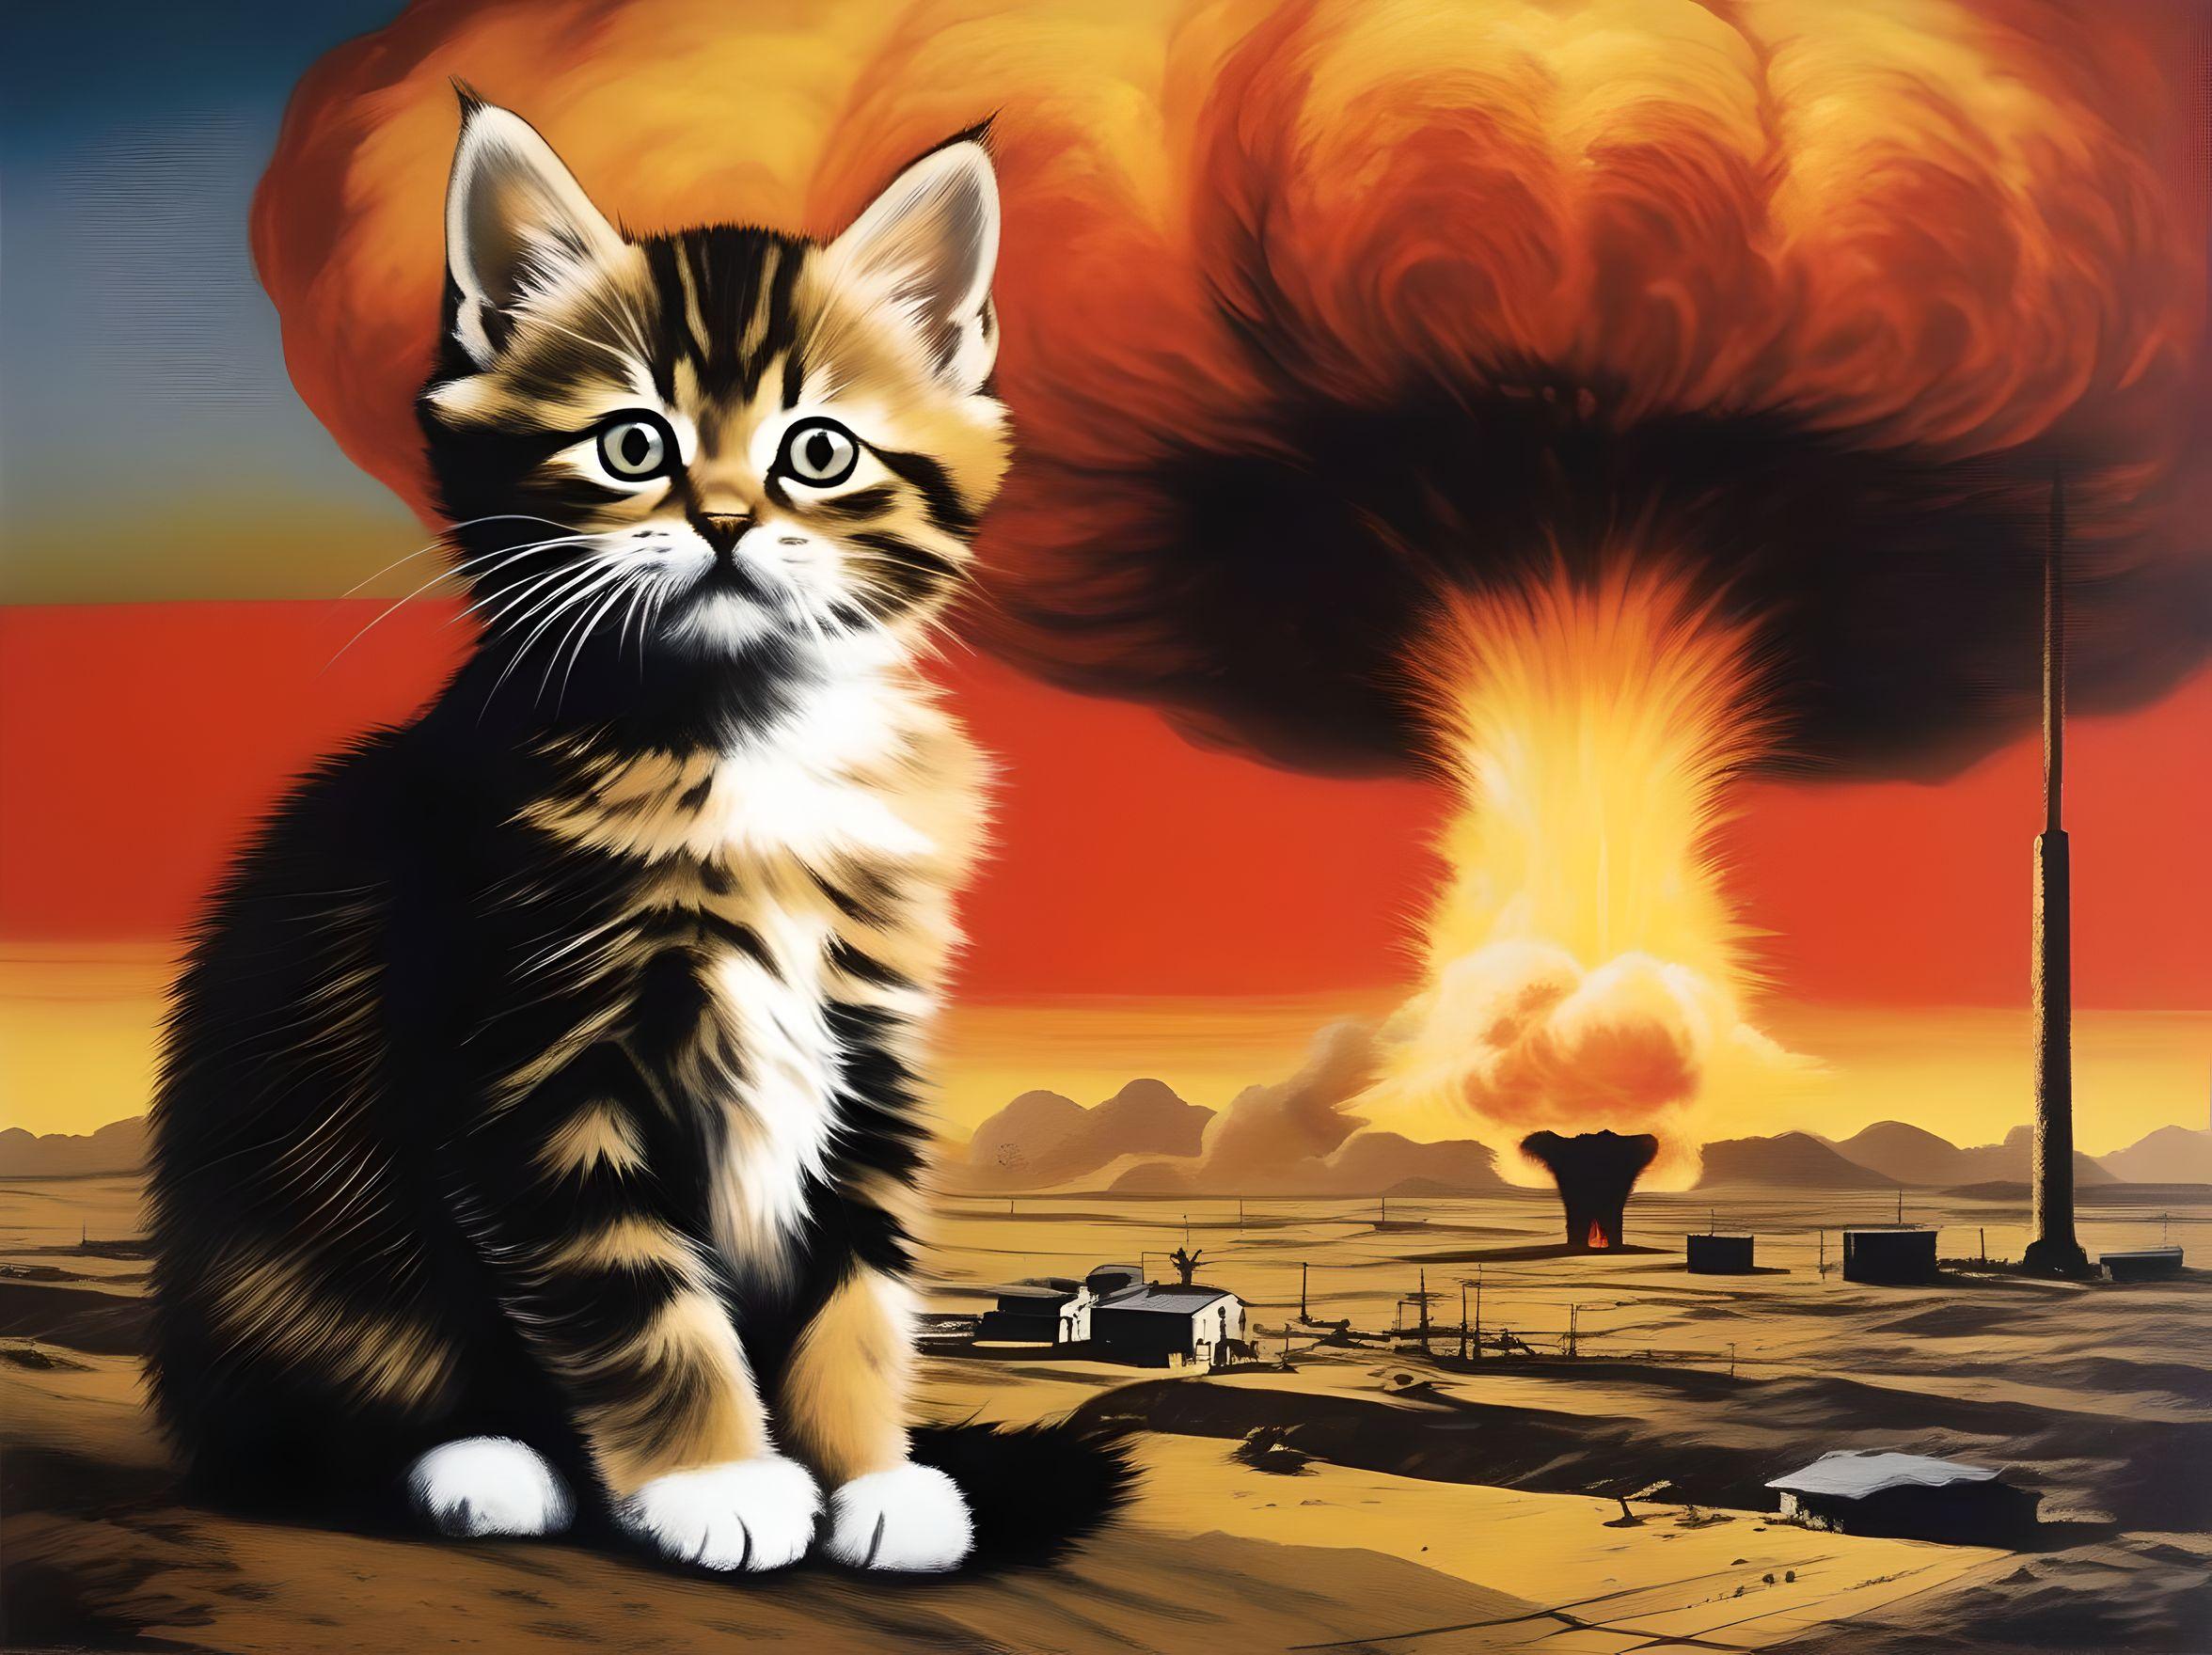 #AIPrompt – In the Style of Dadaism create an image cute kitten in front of nuclear explosion